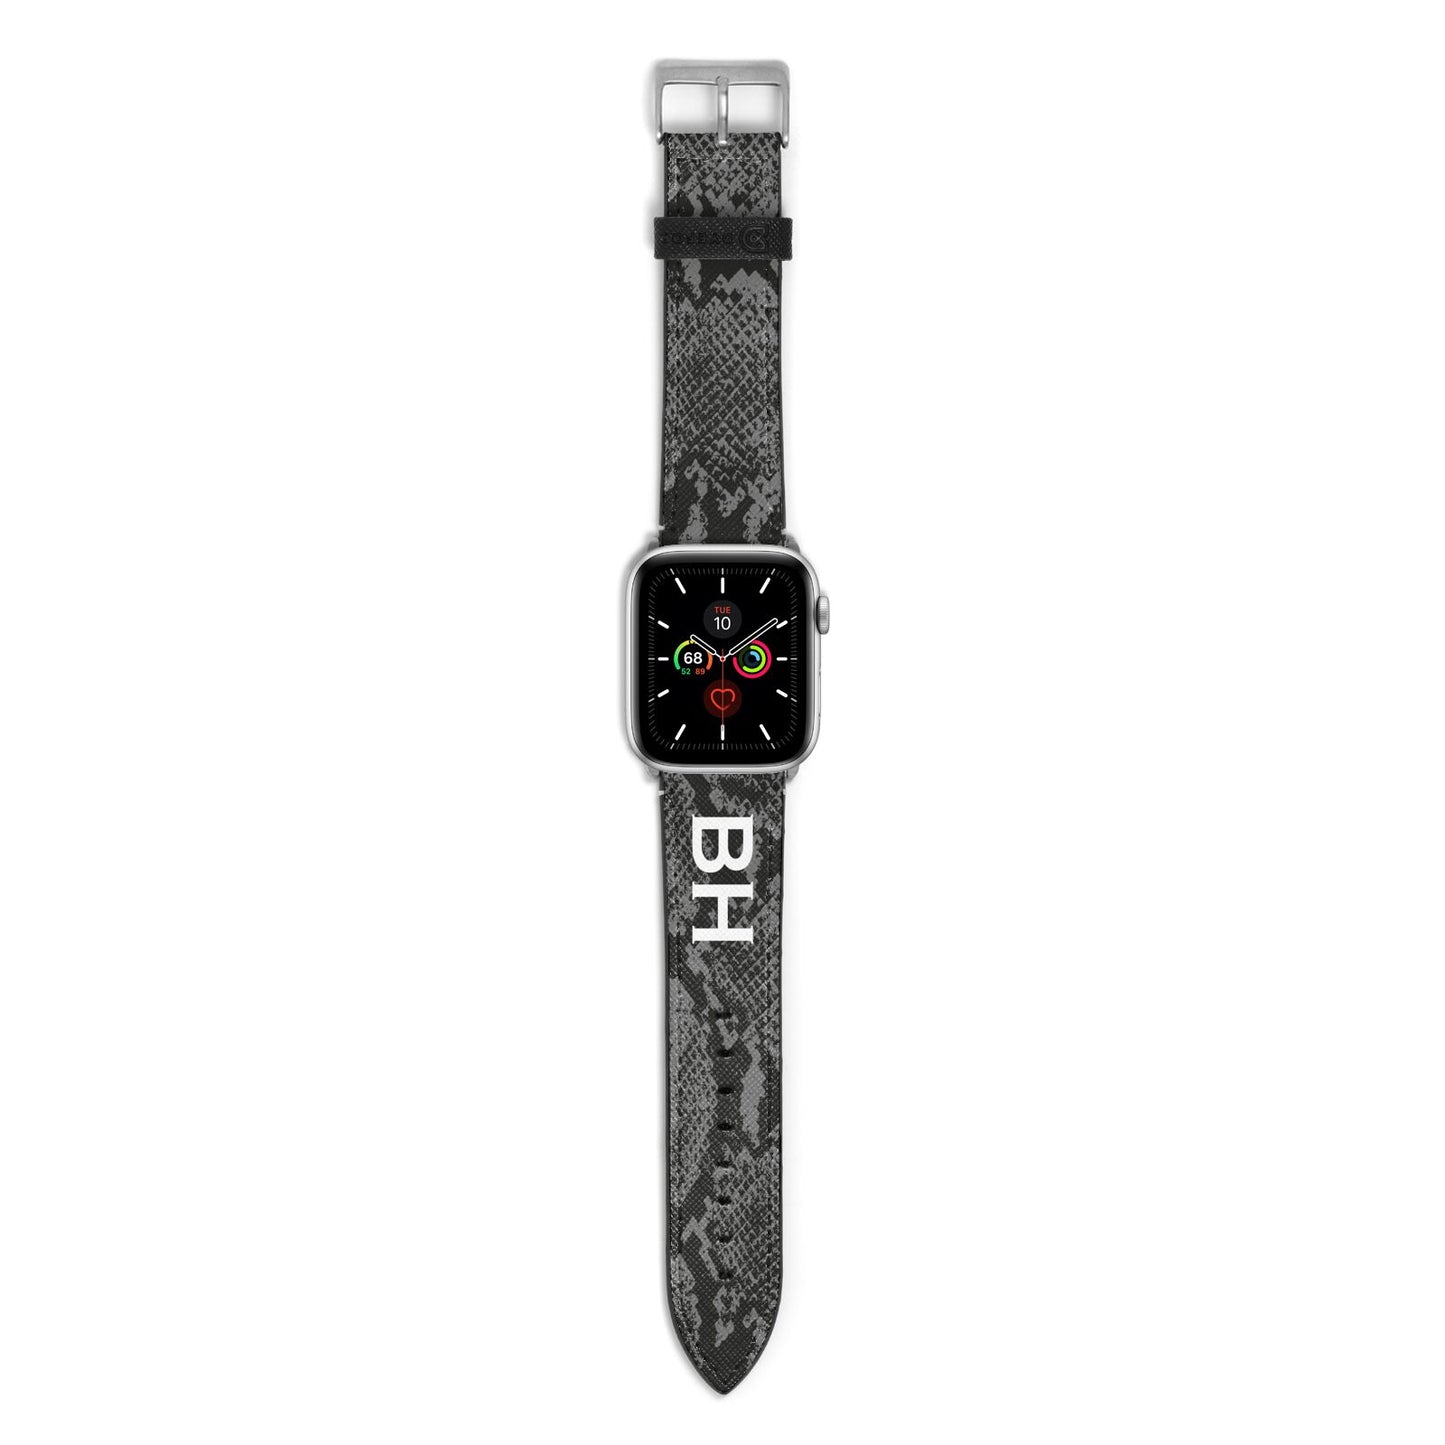 Personalised Snakeskin Apple Watch Strap with Silver Hardware